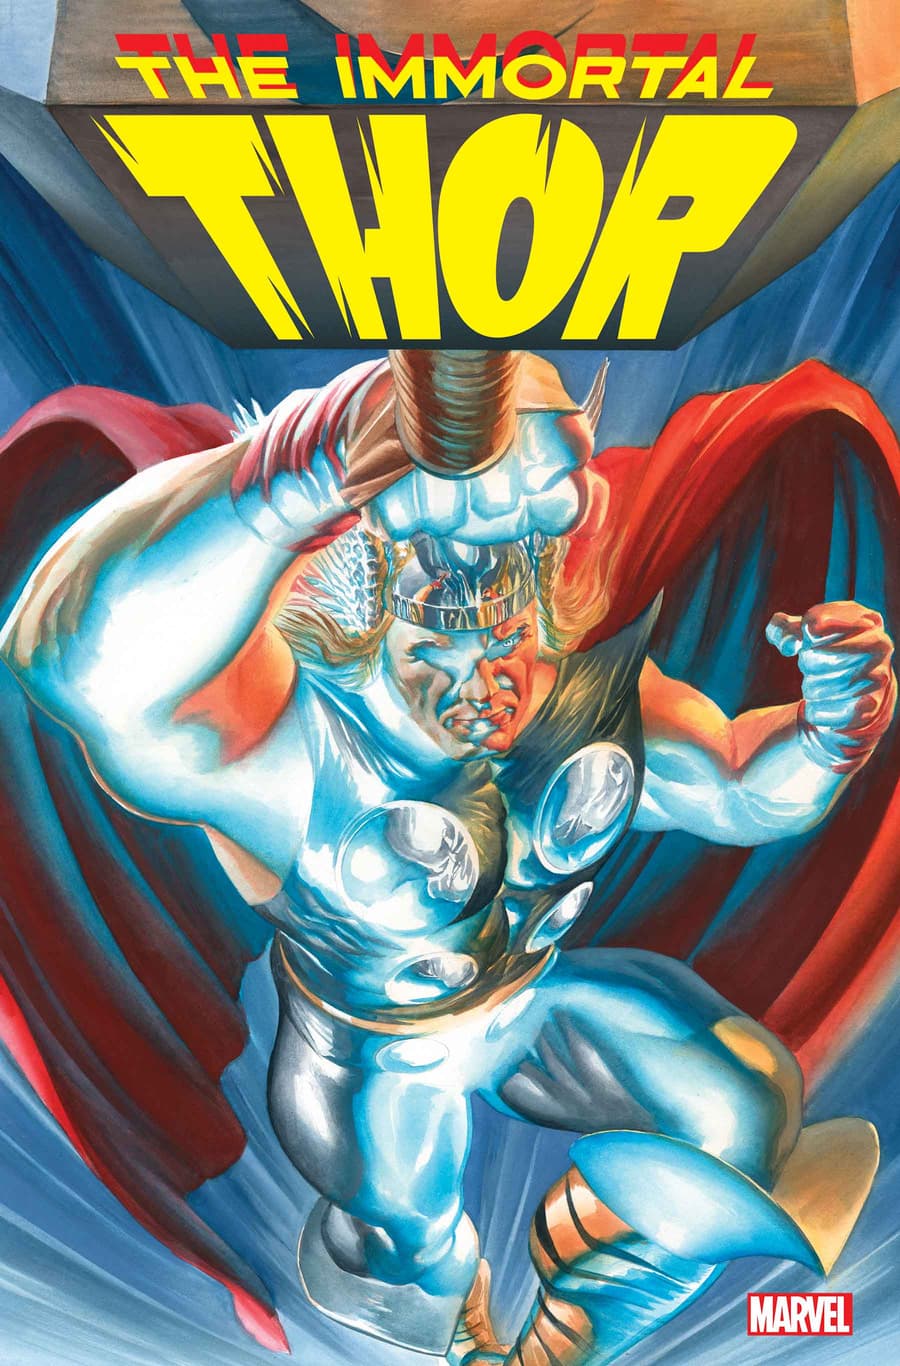 IMMORTAL THOR #1 cover by Alex Ross